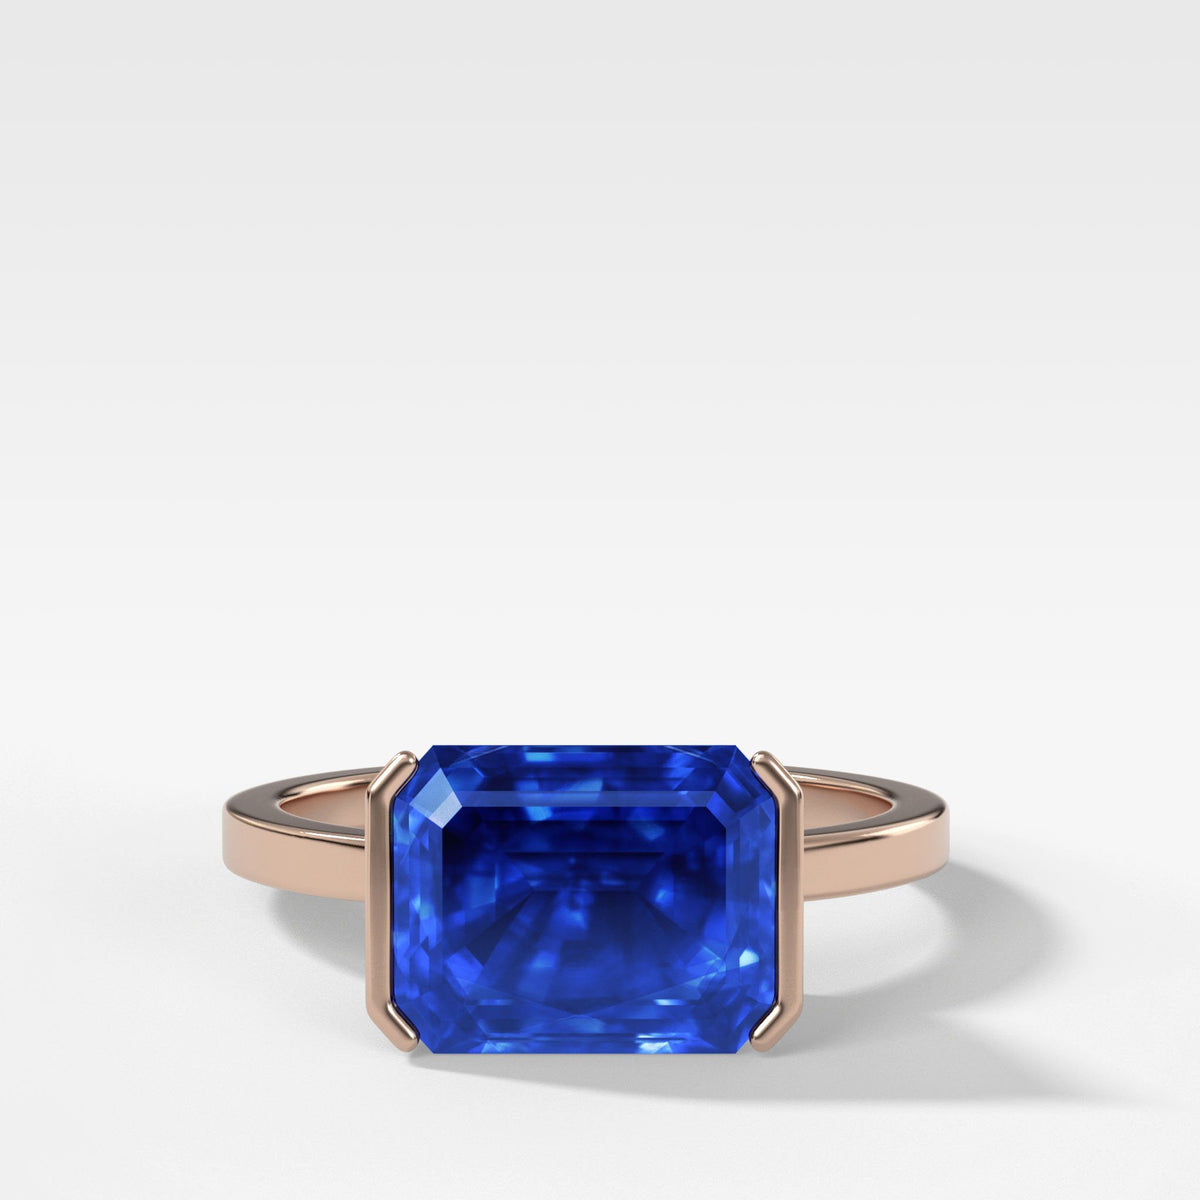 East West Half Bezel Solitaire with 2.99ct Emerald Ceylon Blue Sapphire by Good Stone in Rose Gold